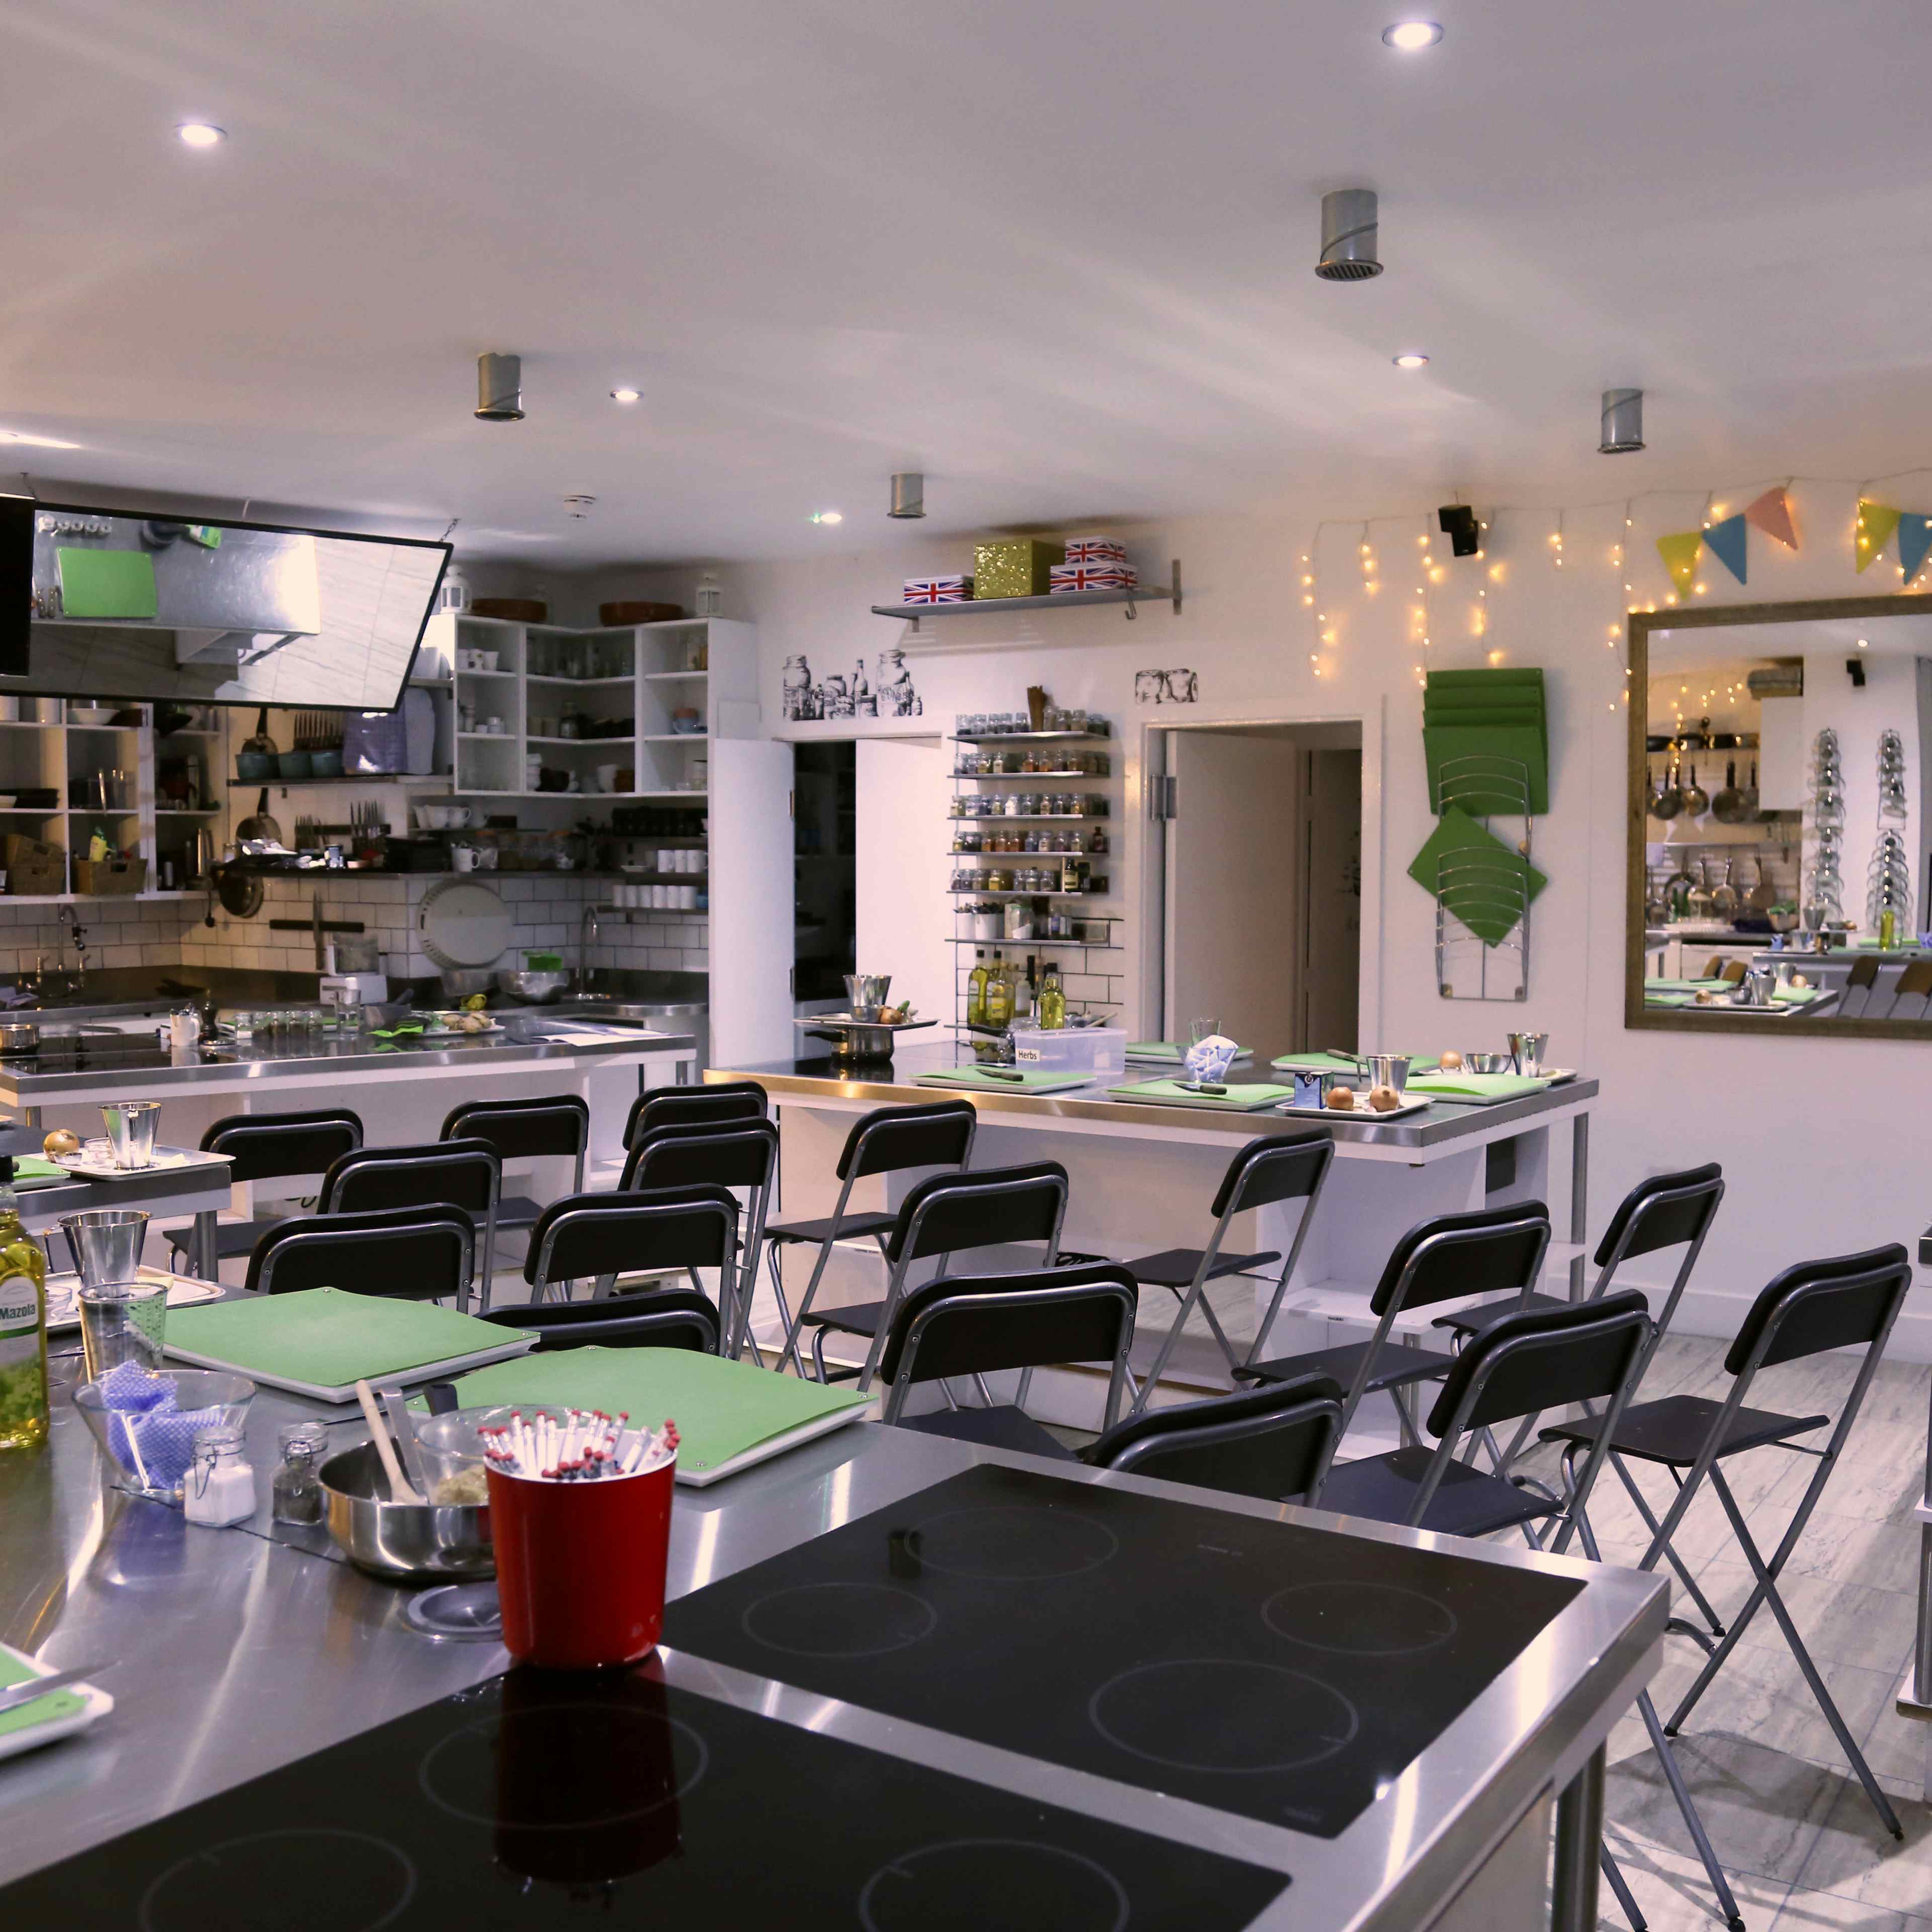 Complete Kitchen @ The Avenue Cookery School - Professional Kitchen to rent & hire image 2